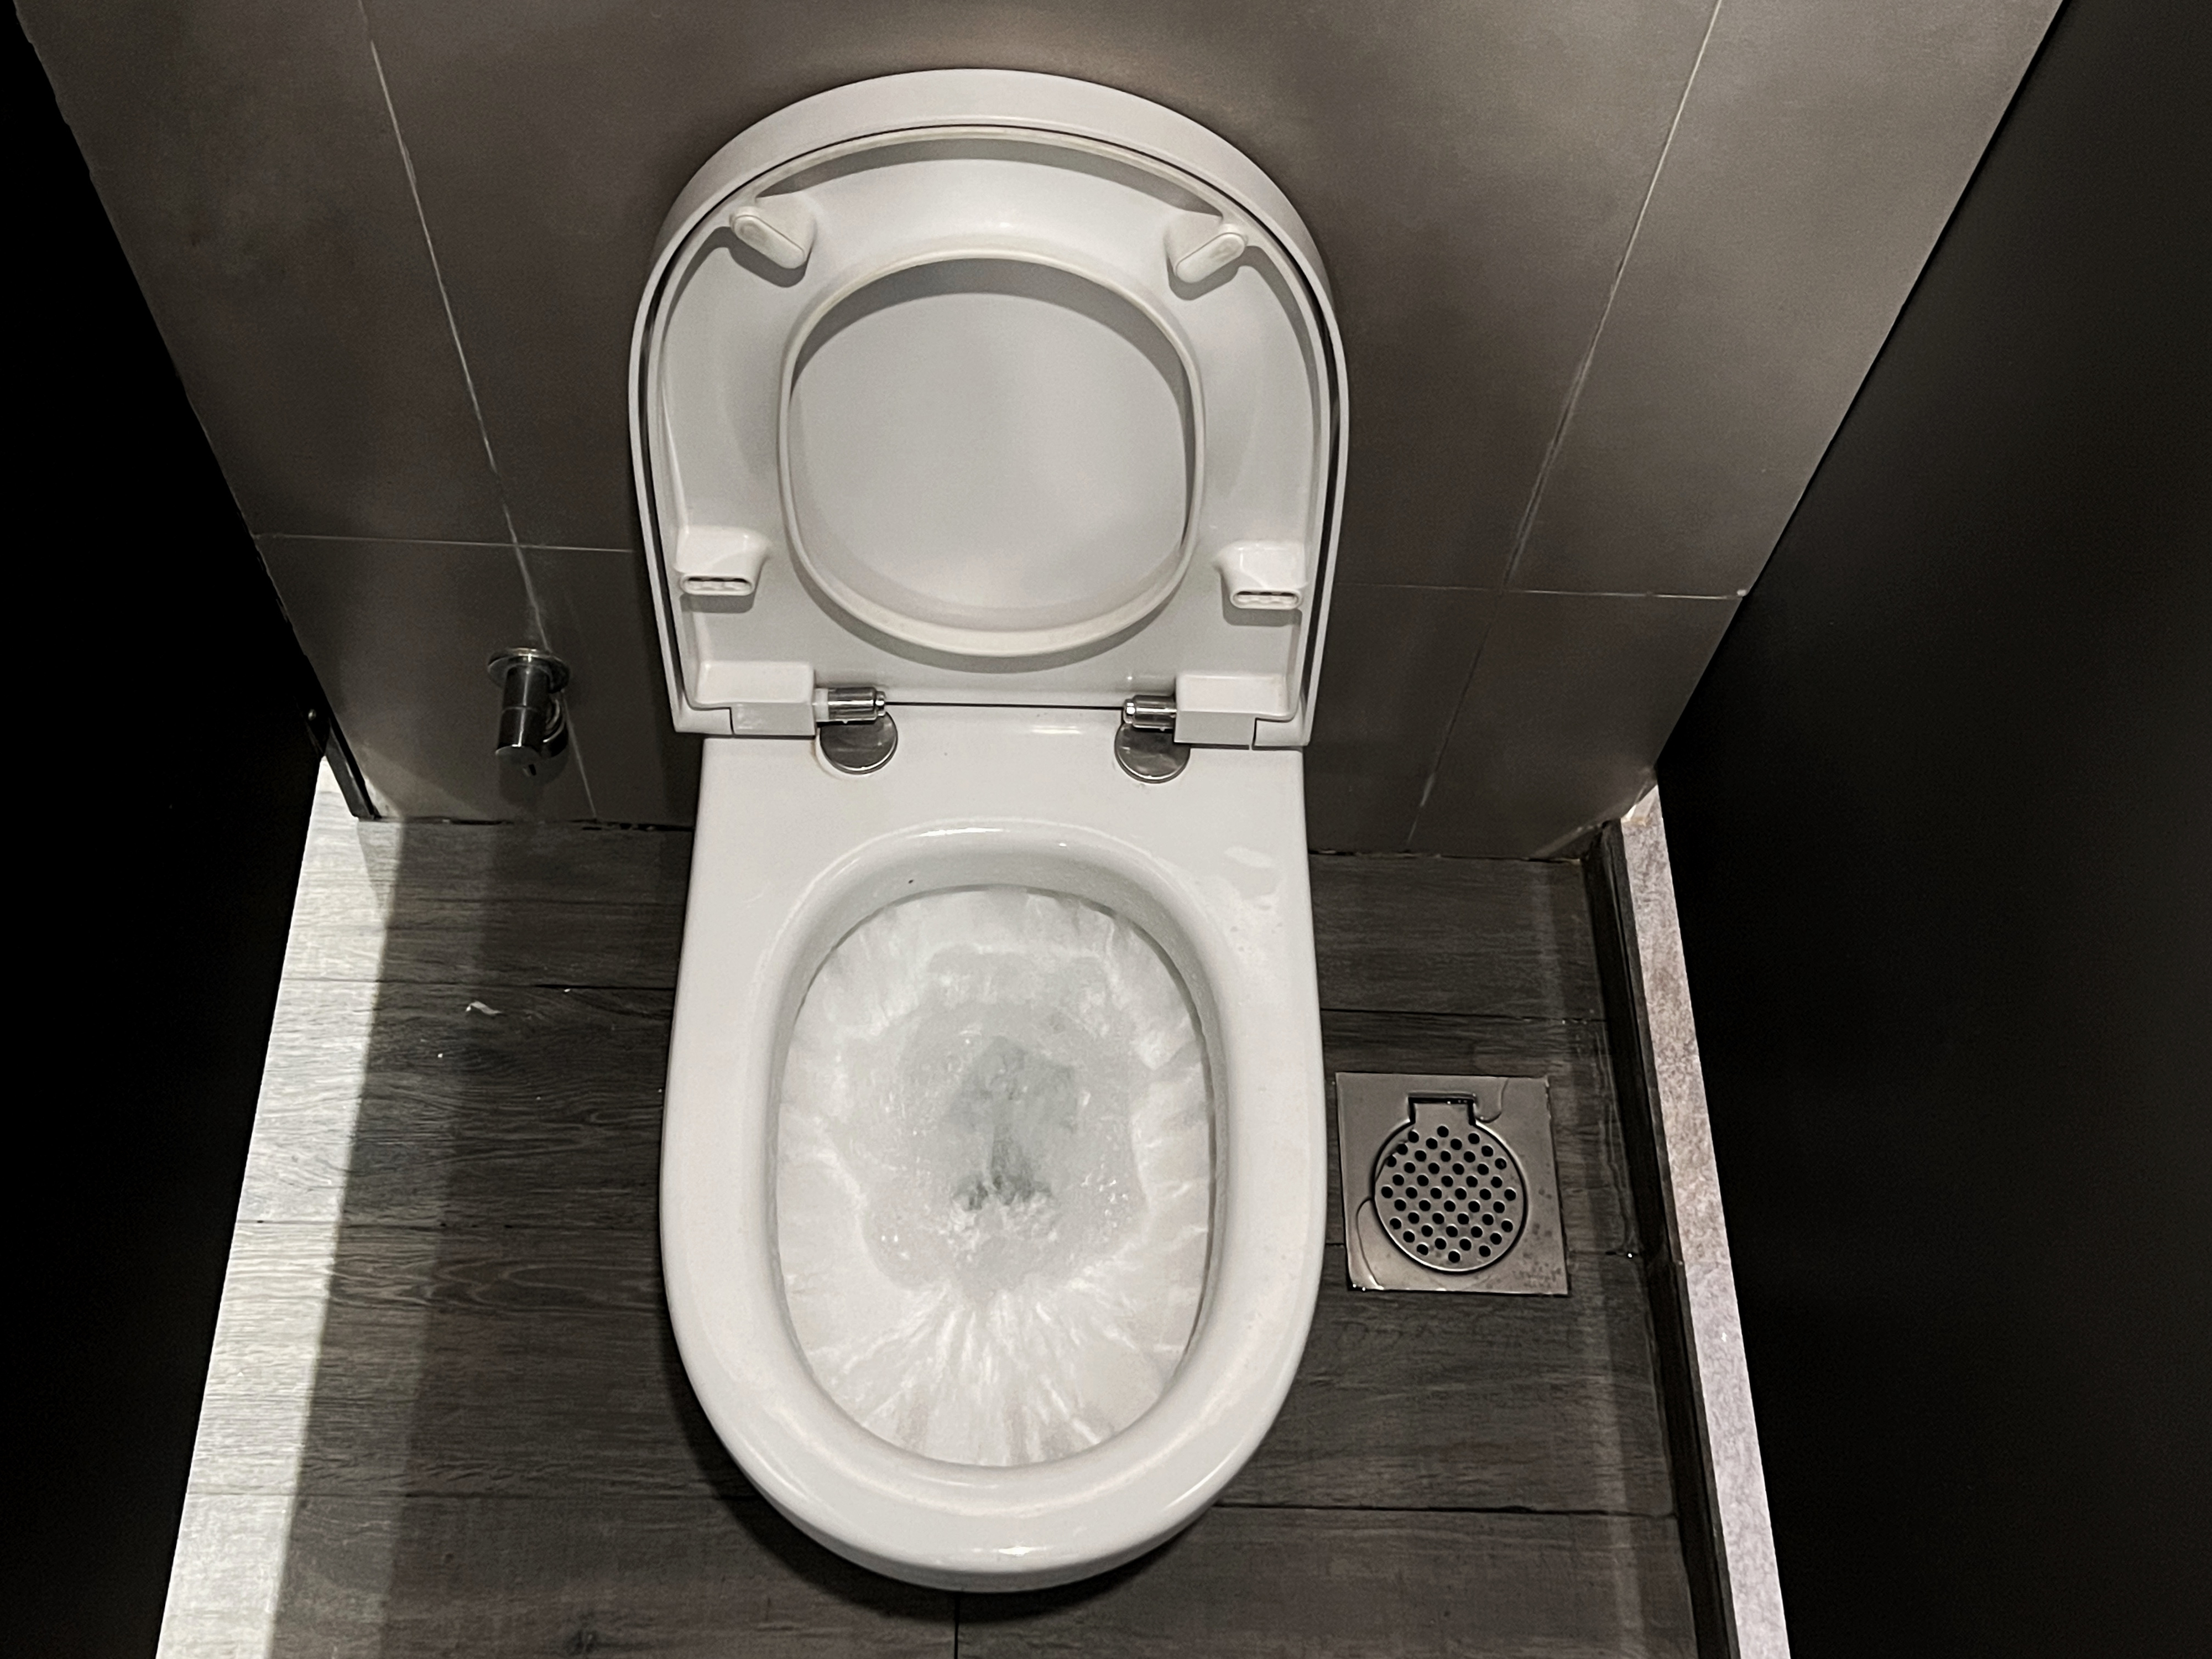 An open toilet with a seat cover in a restroom stall, no people visible